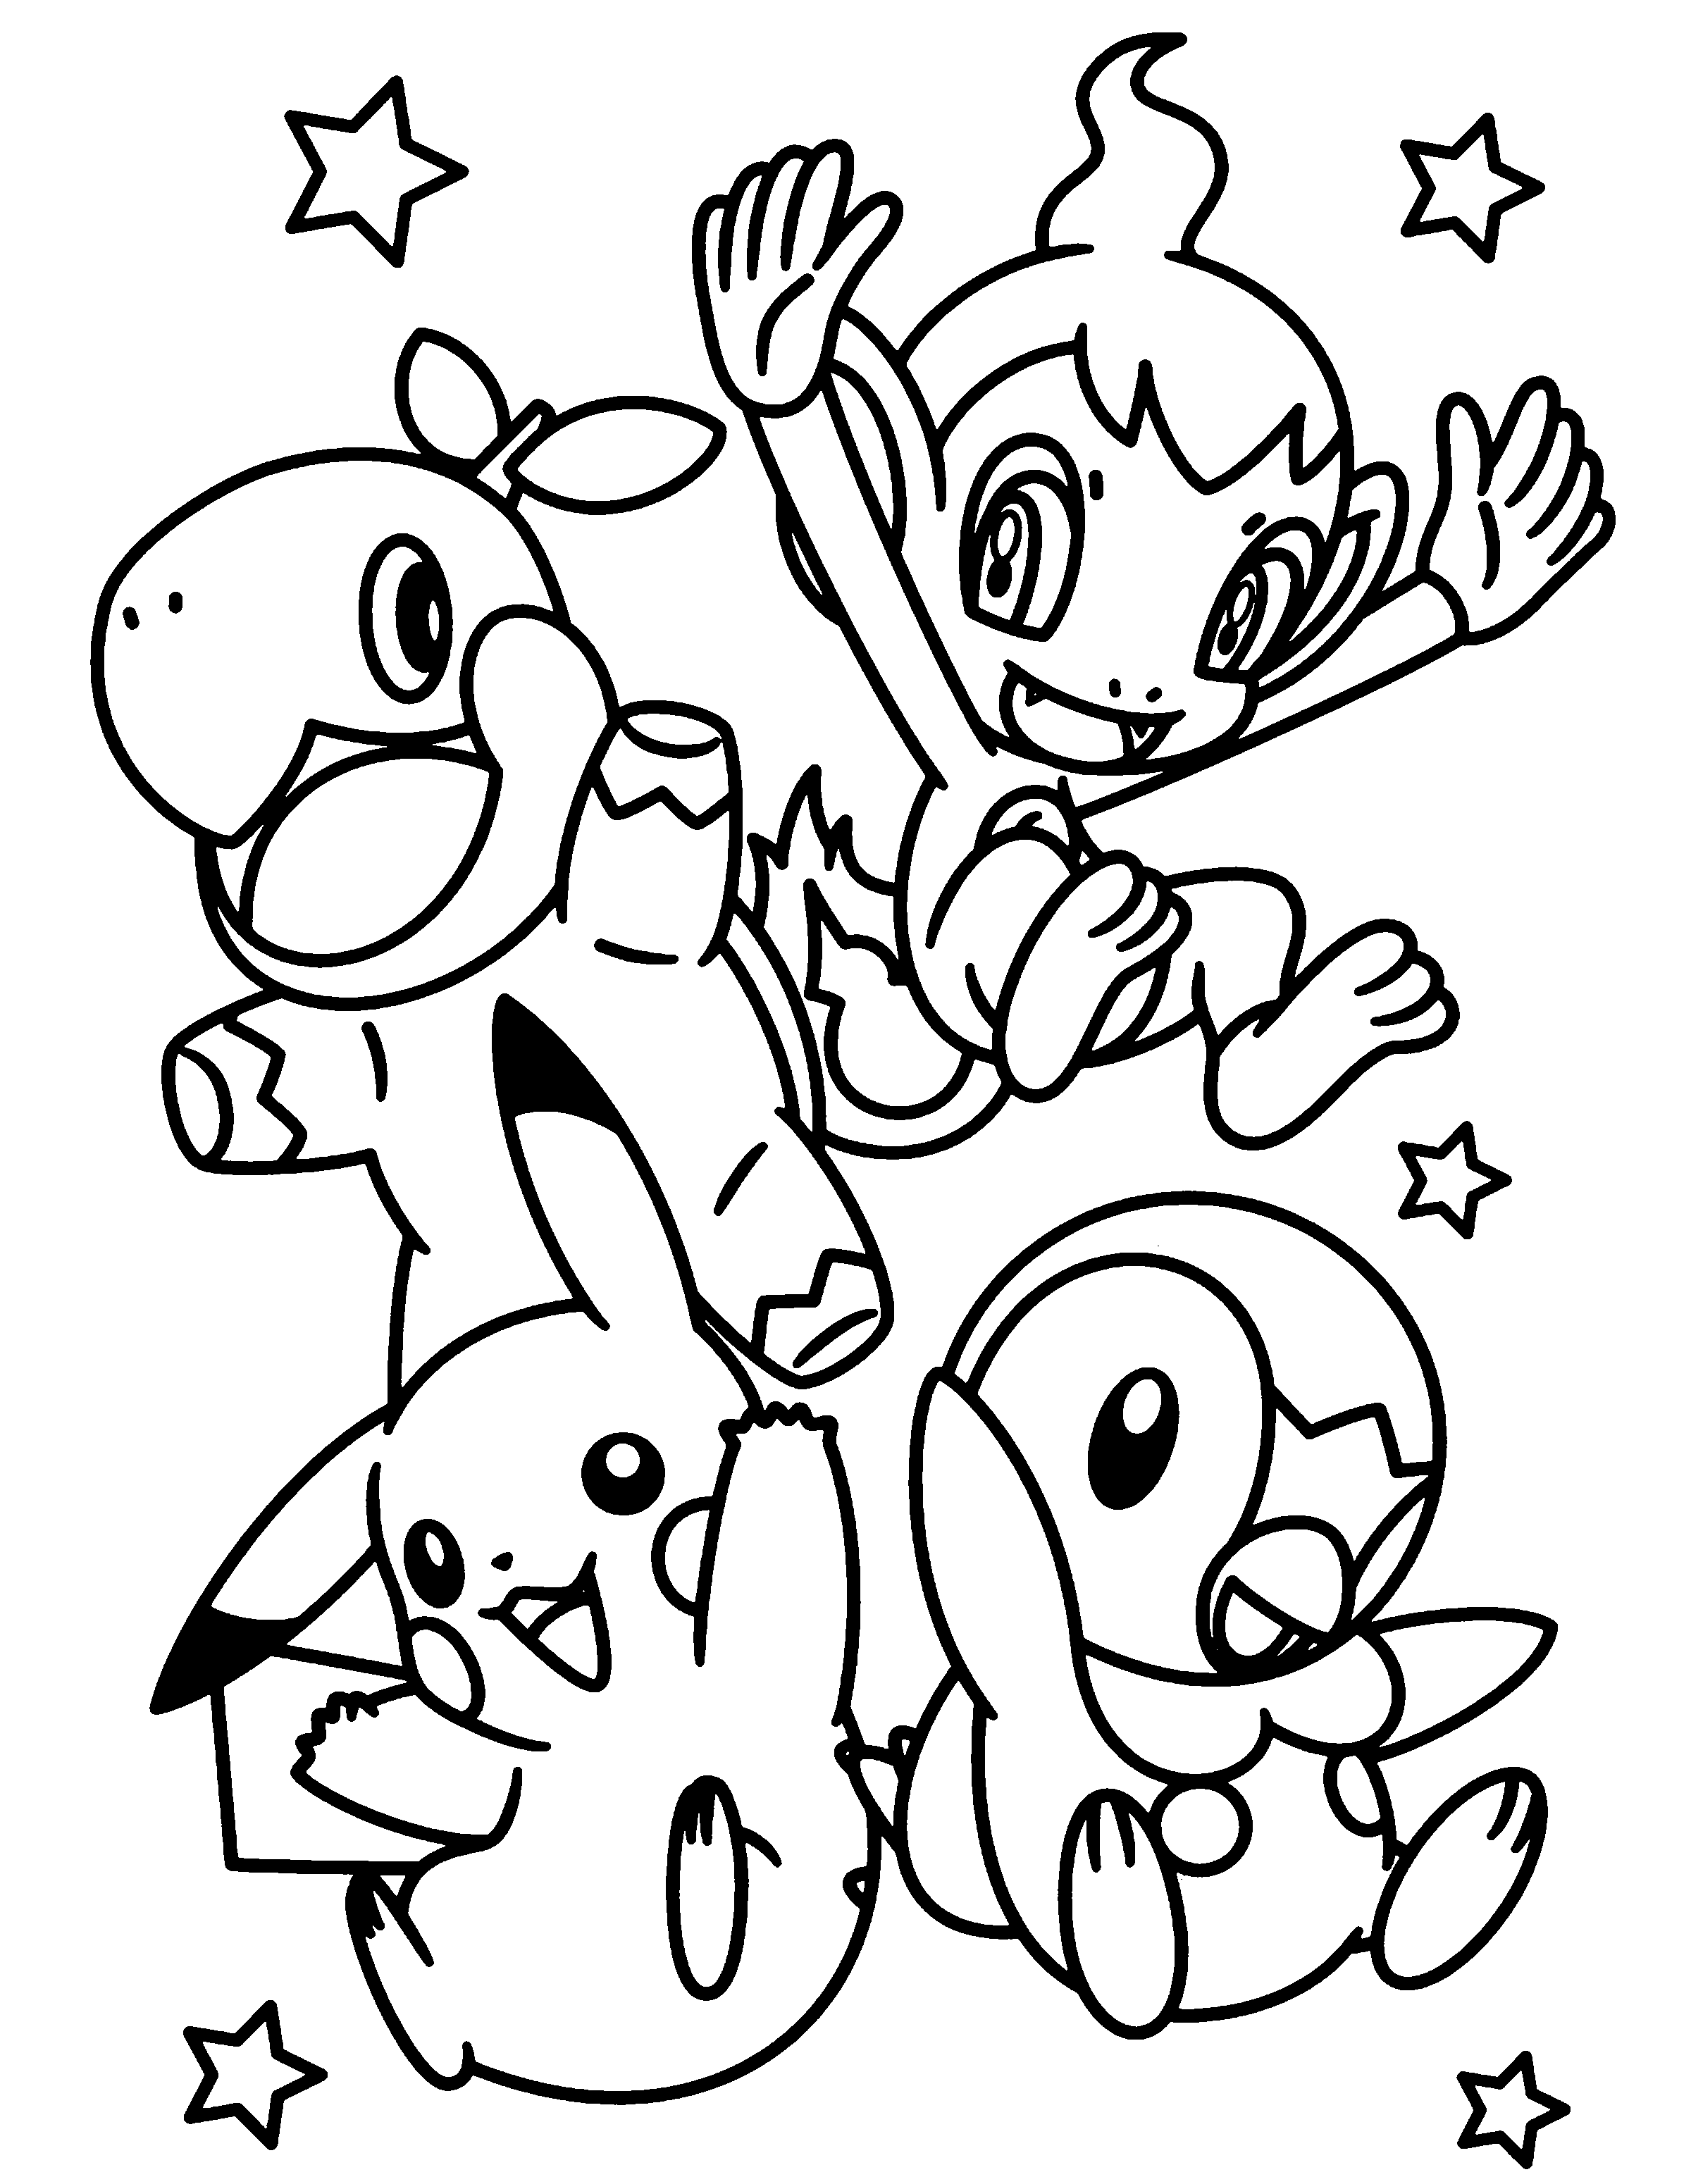 coloring pages pokemon piplup - photo #29